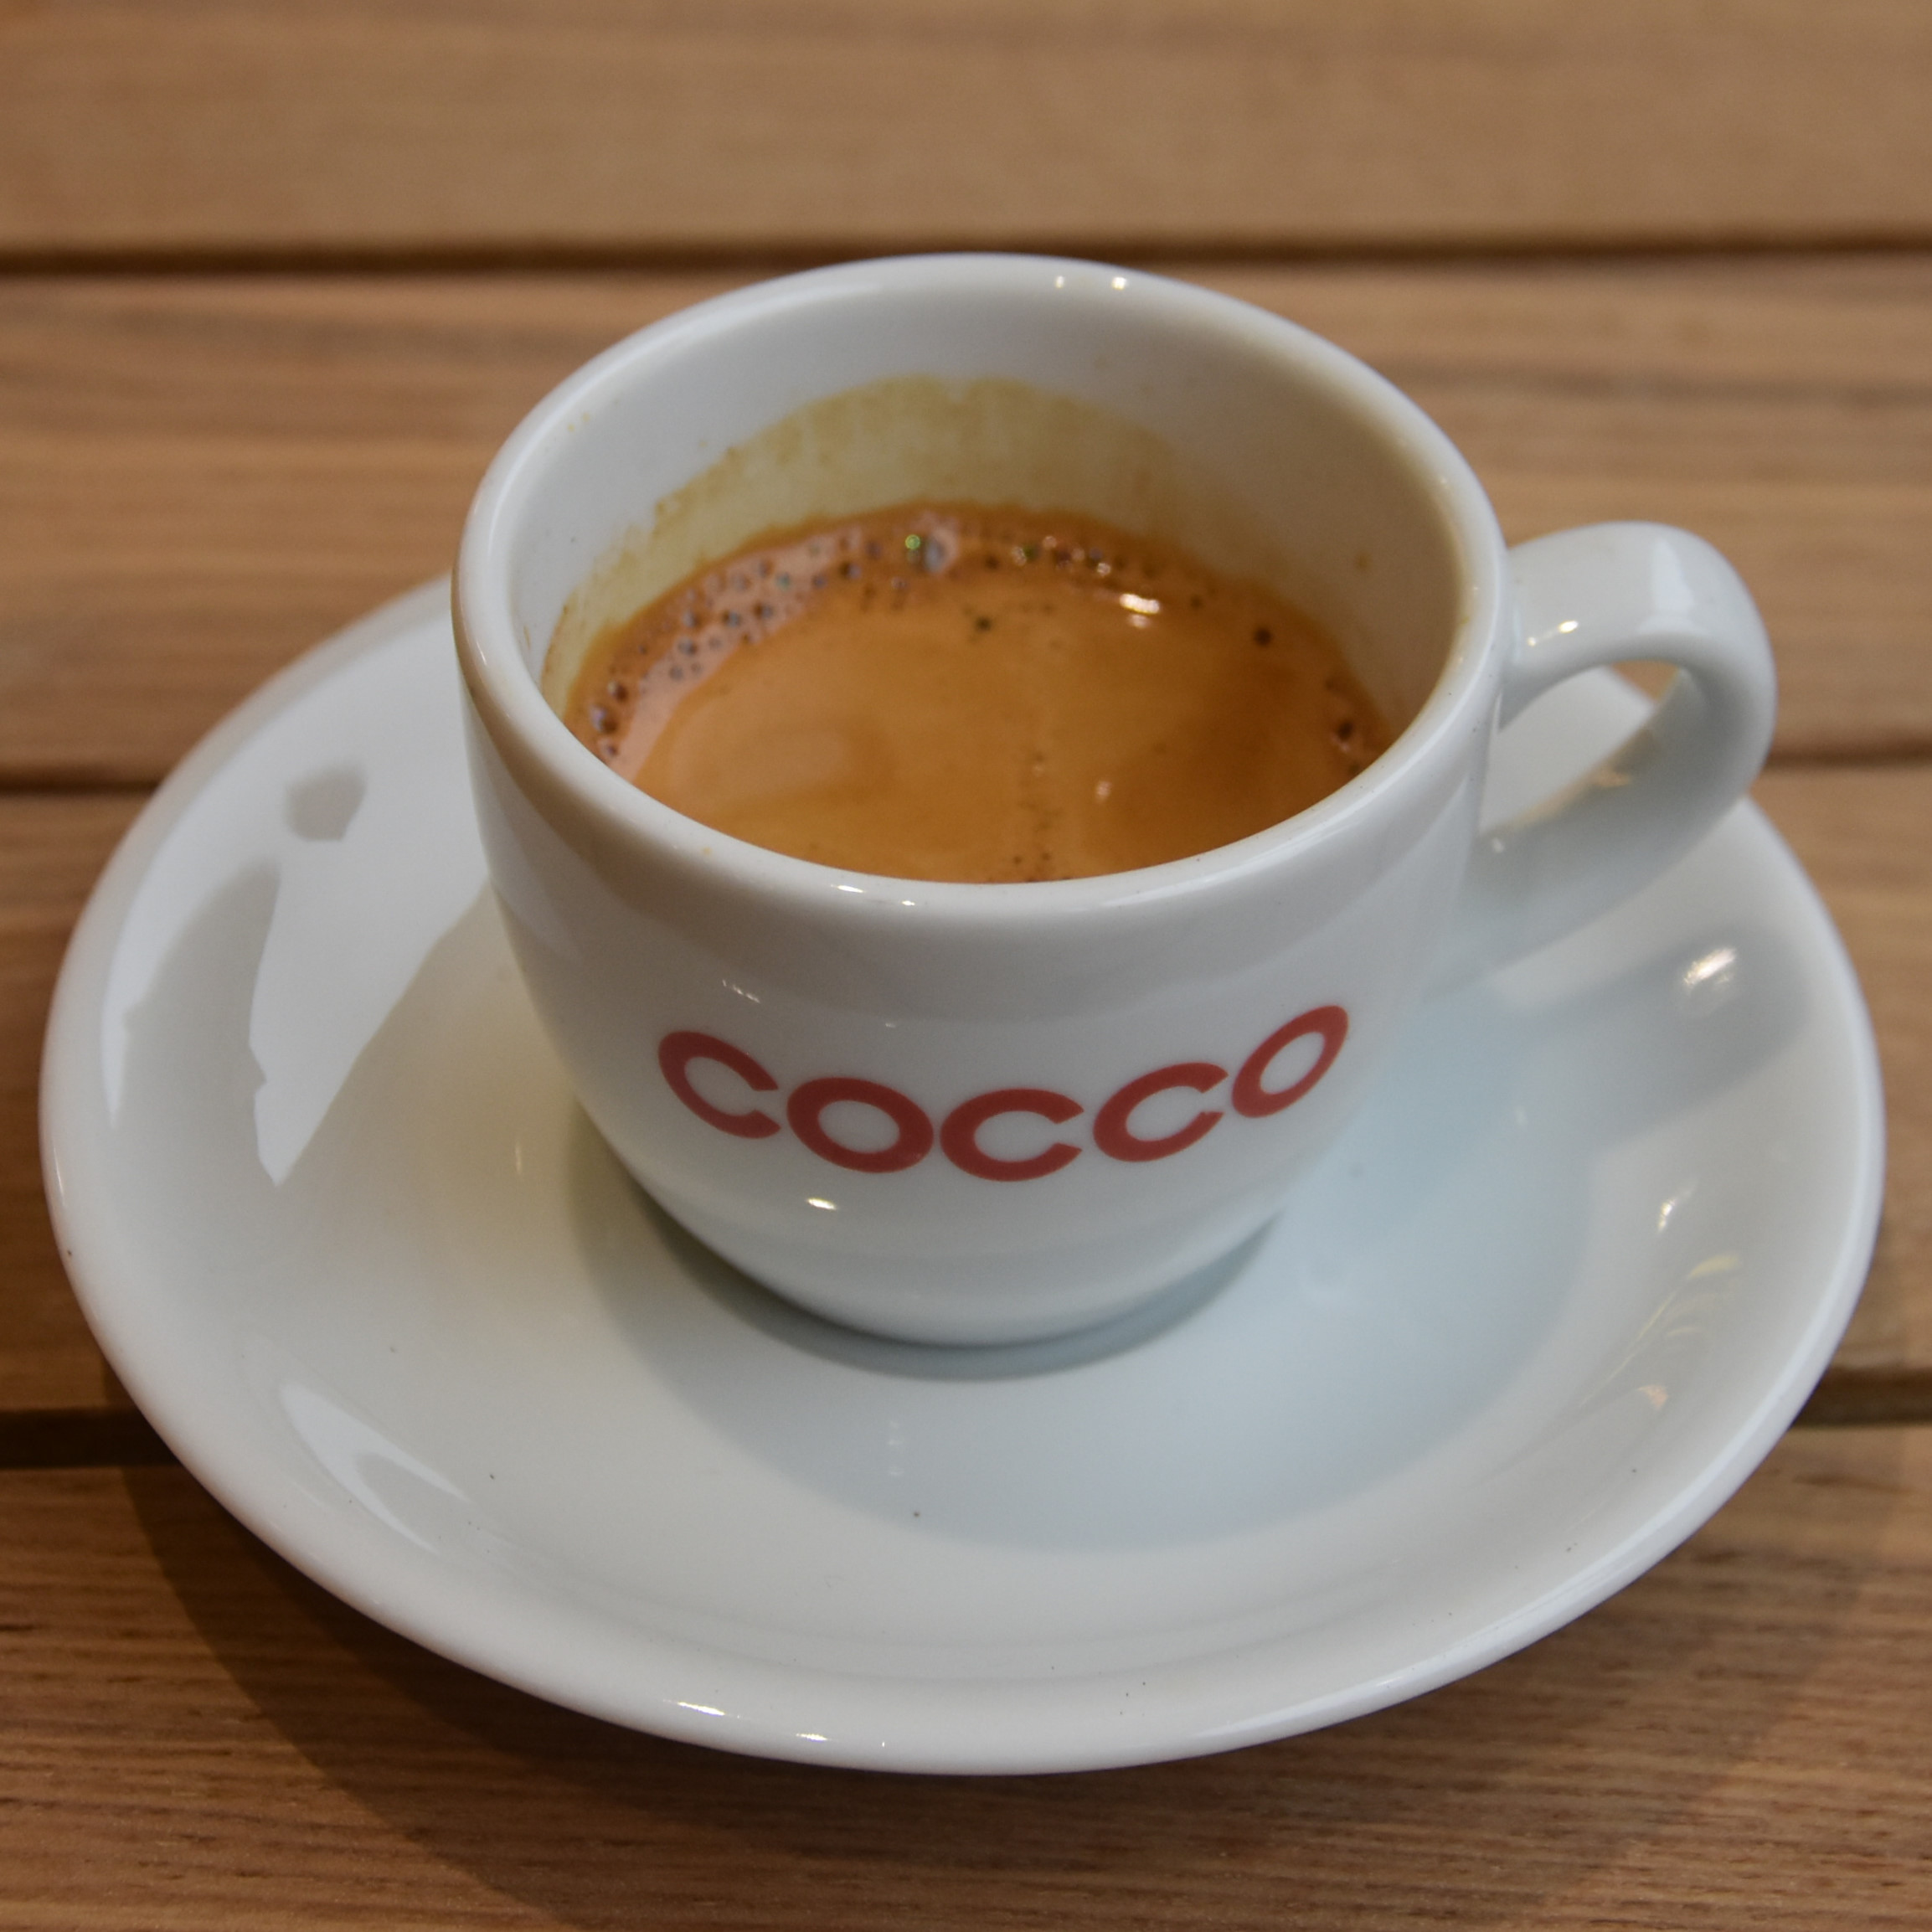 An espresso, made with the Red Brick blend from Square Mile, served in a classic white cup with "Cocco" on the side in red at Cocco Patisserie & Coffee.